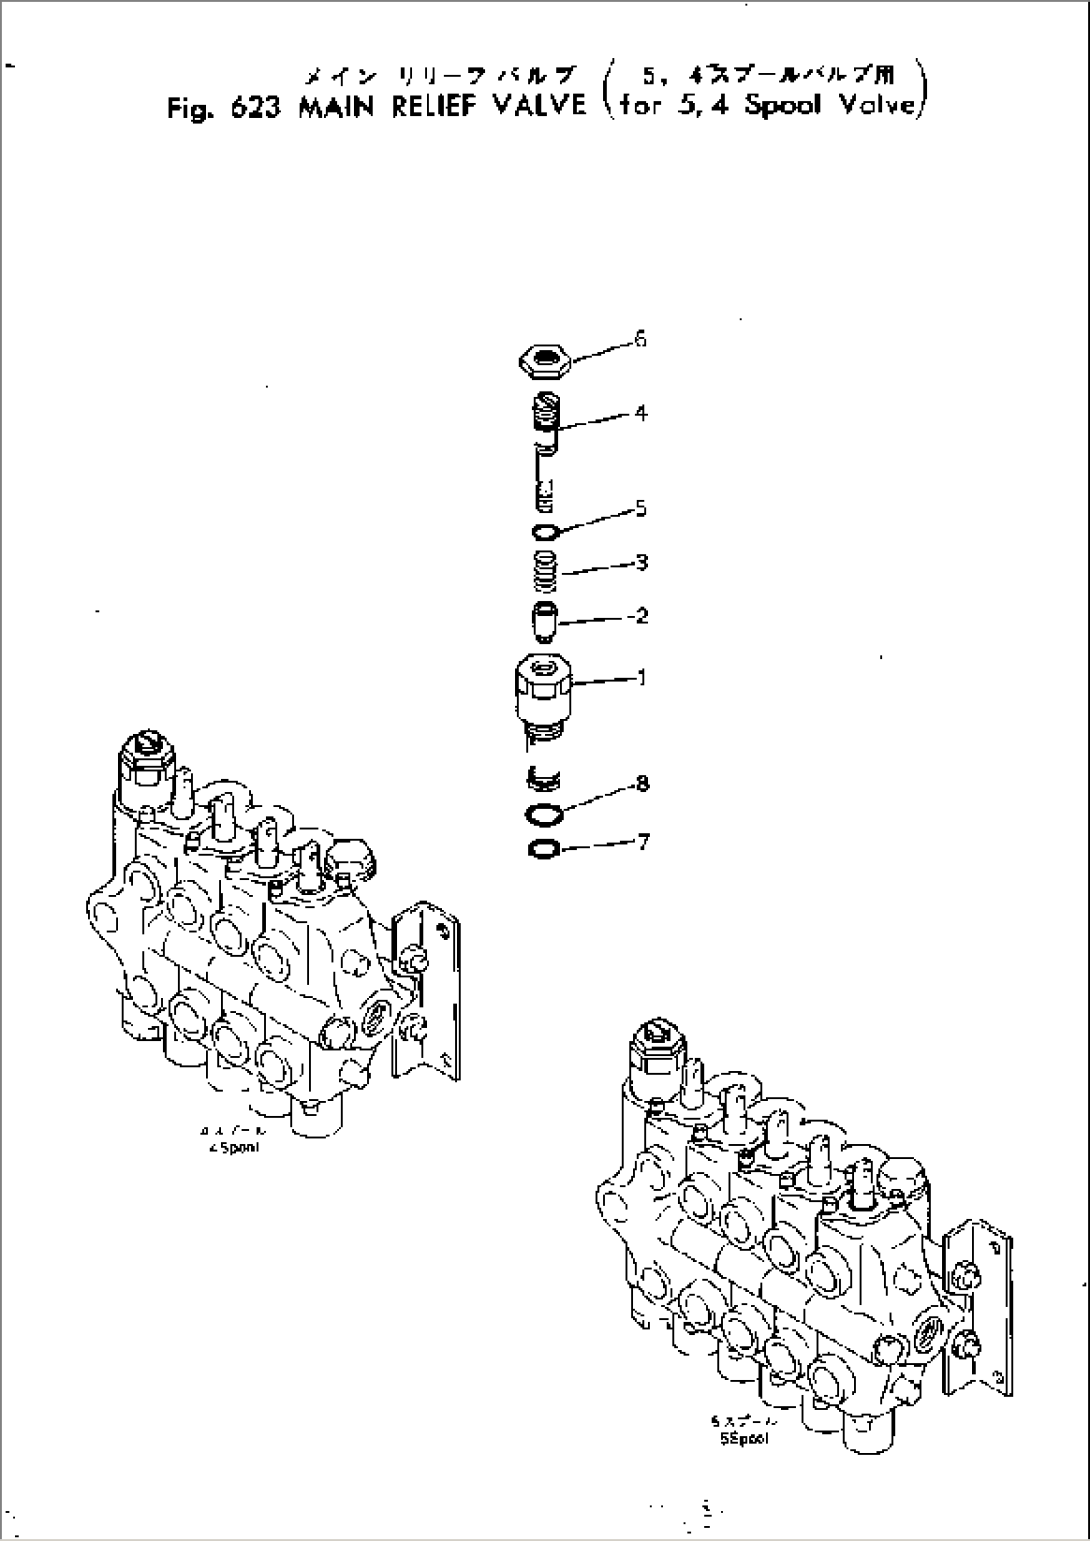 MAIN RELIEF VALVE (FOR 5 AND 4-SPOOL VALVE)